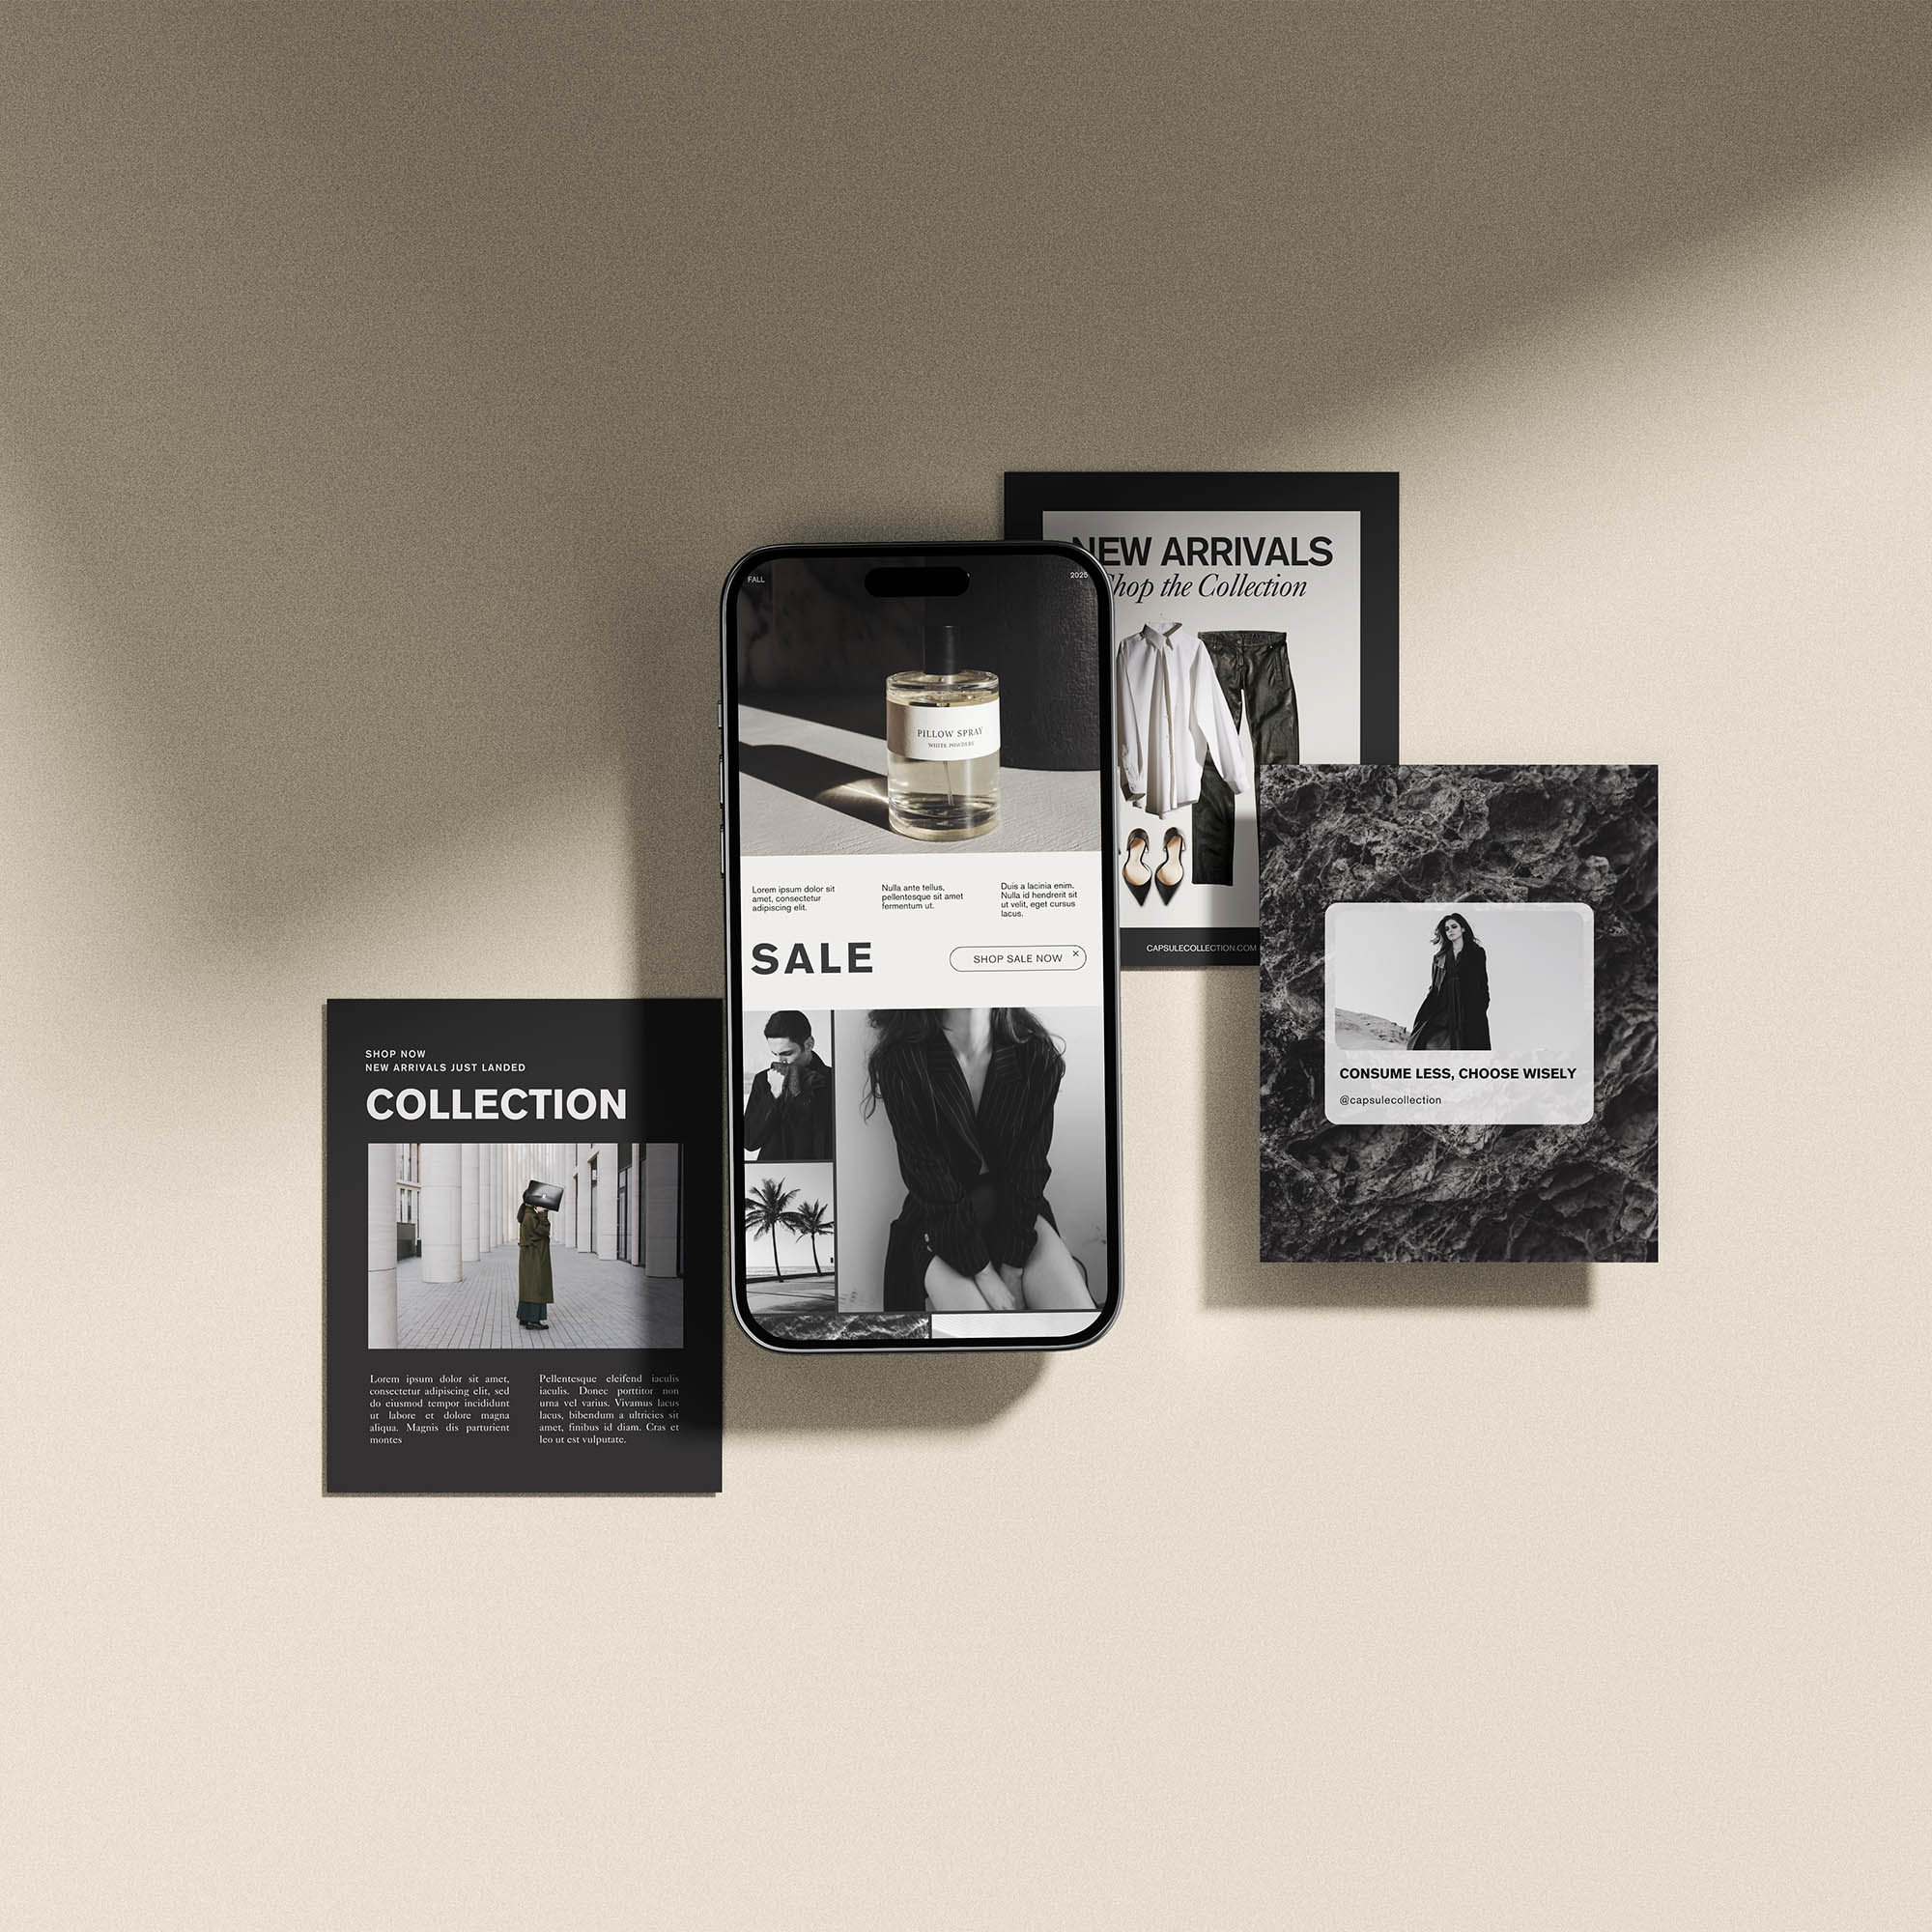 Capsule Luxury Social Media Canva Templates for High-End and Premium Brands by Studio Seagraves